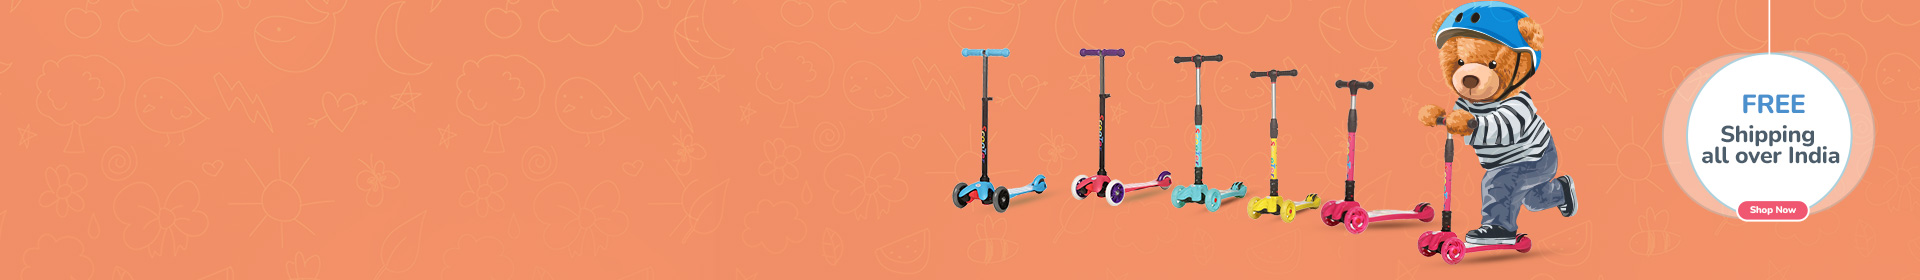 Kick Scooters